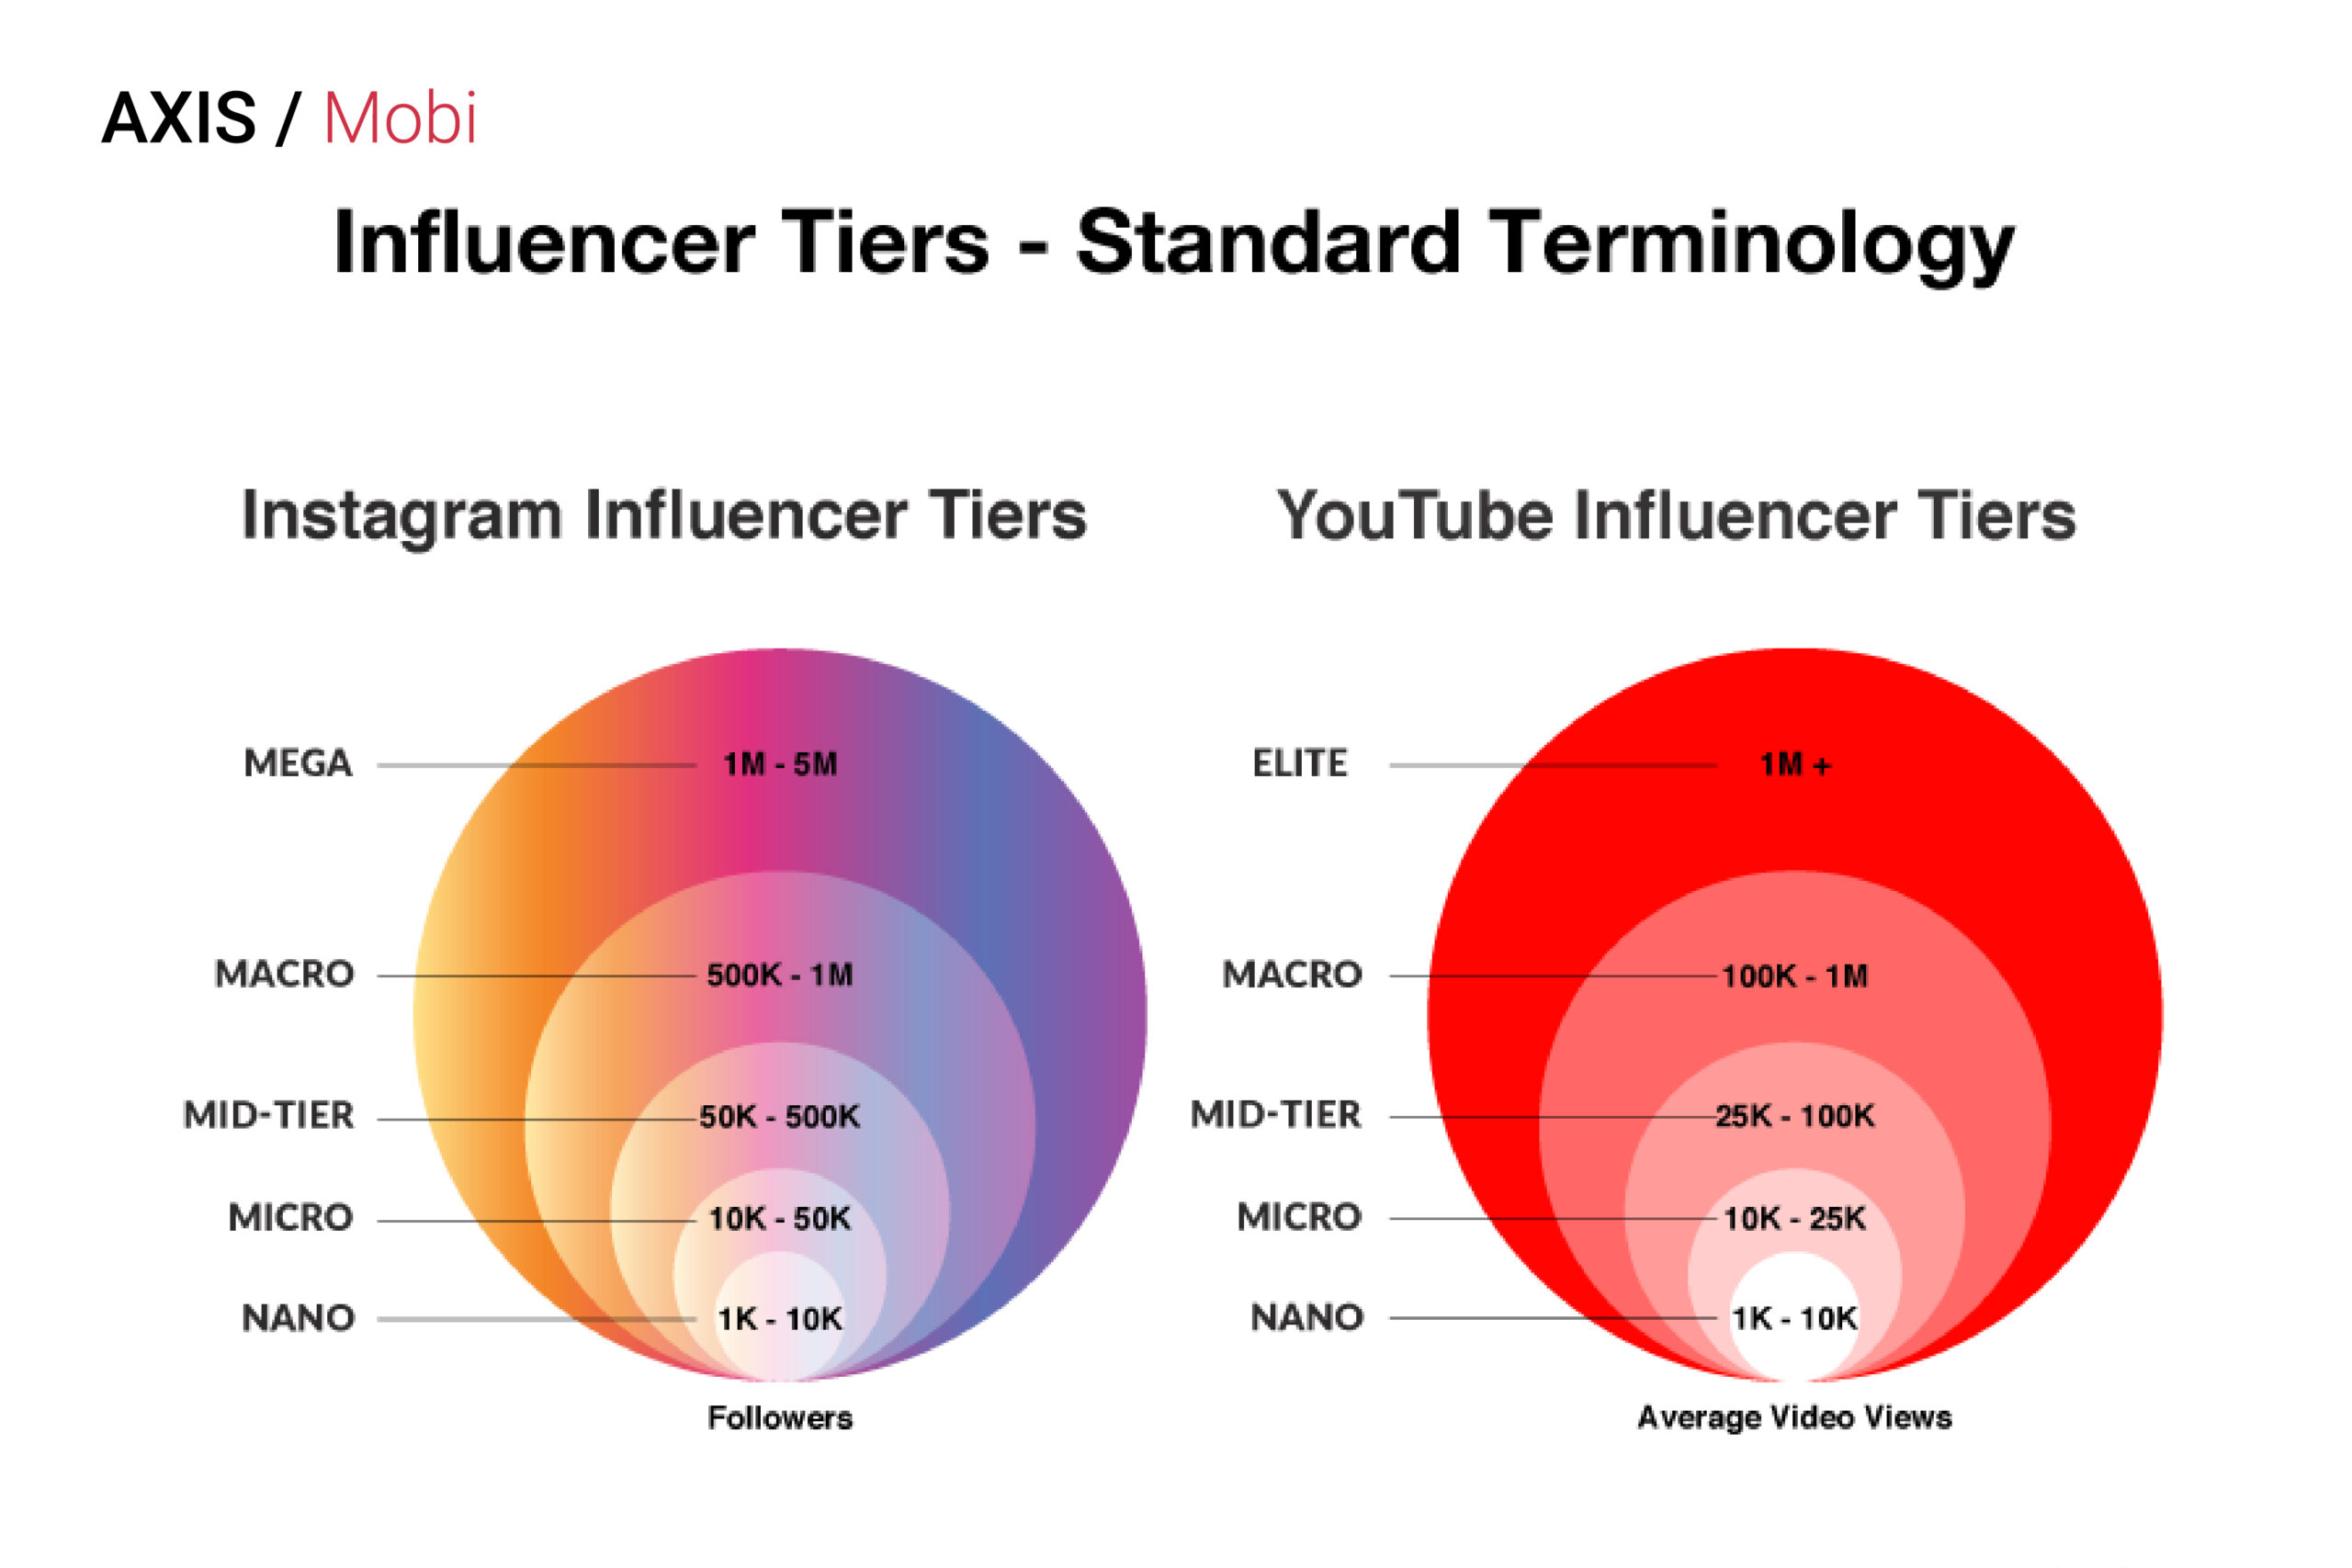 Micro and nano influencers will receive more attention